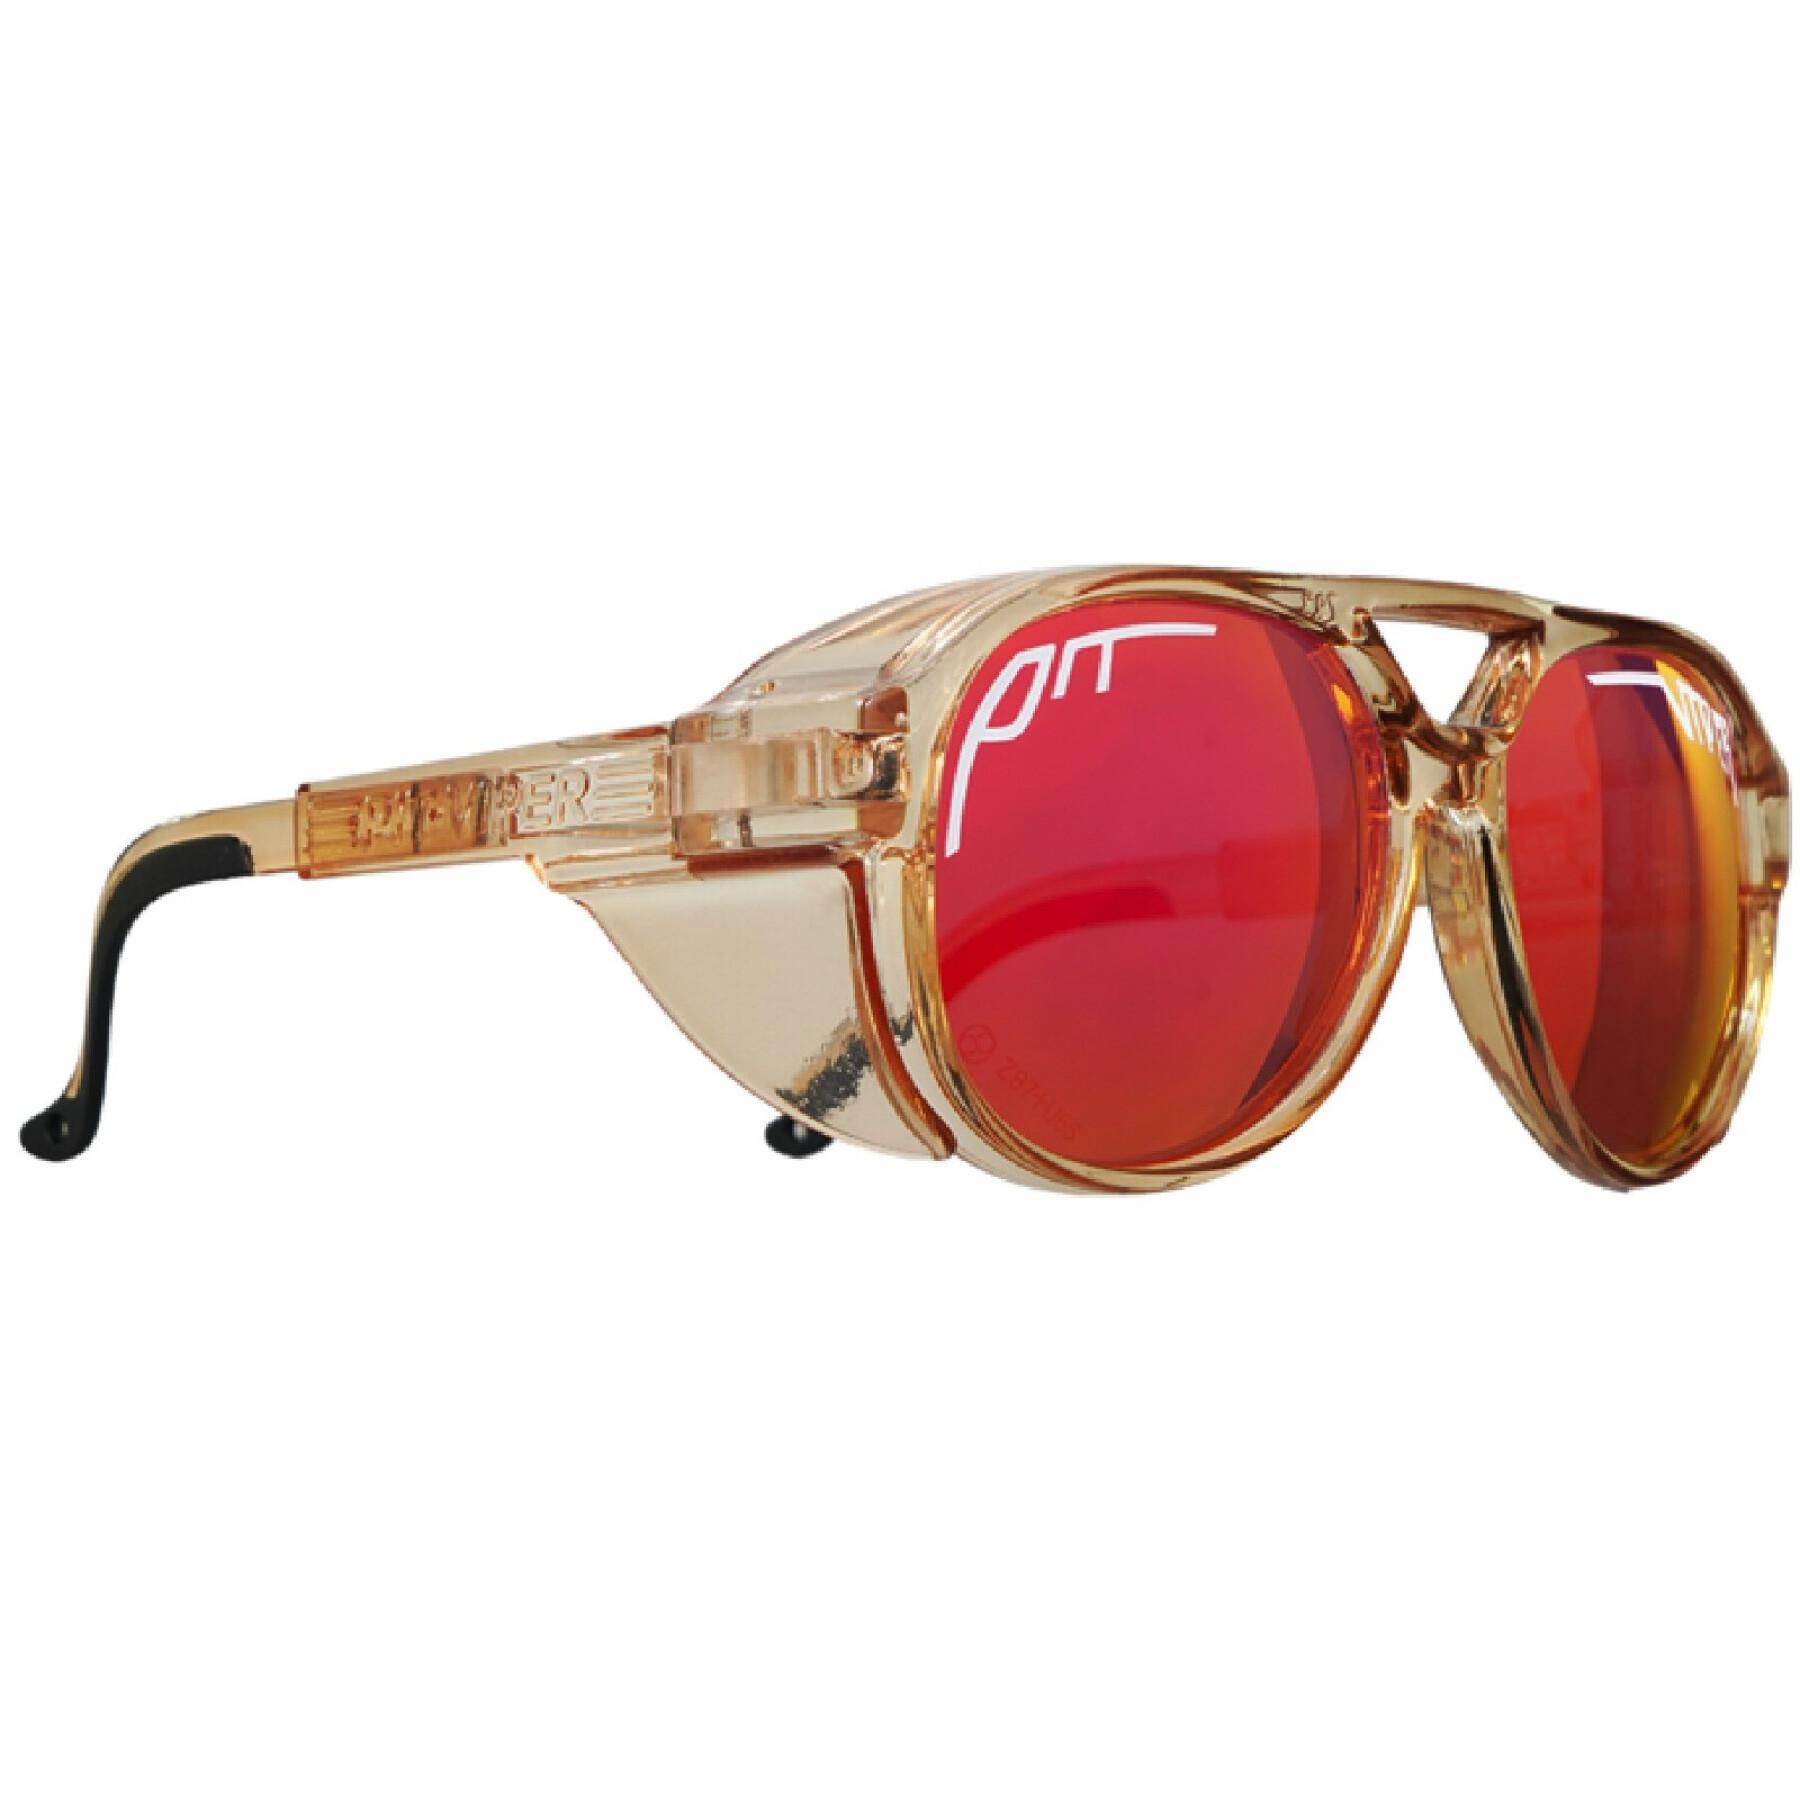 Polarized sunglasses Pit Viper The Corduroy Exciters